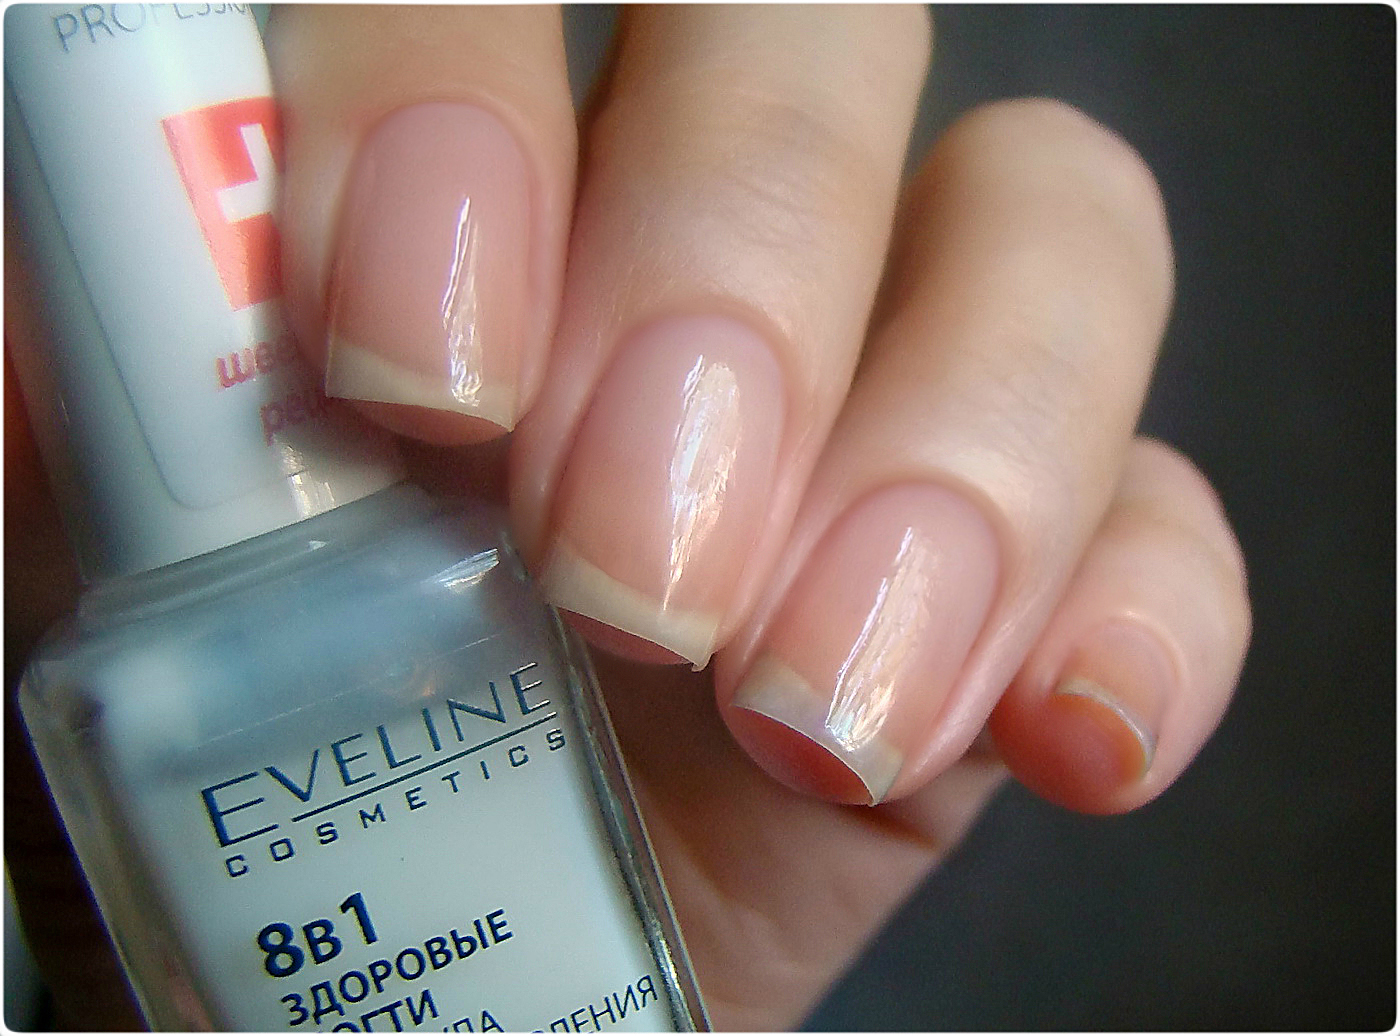 Eveline Cosmetics Nail Therapy Professional